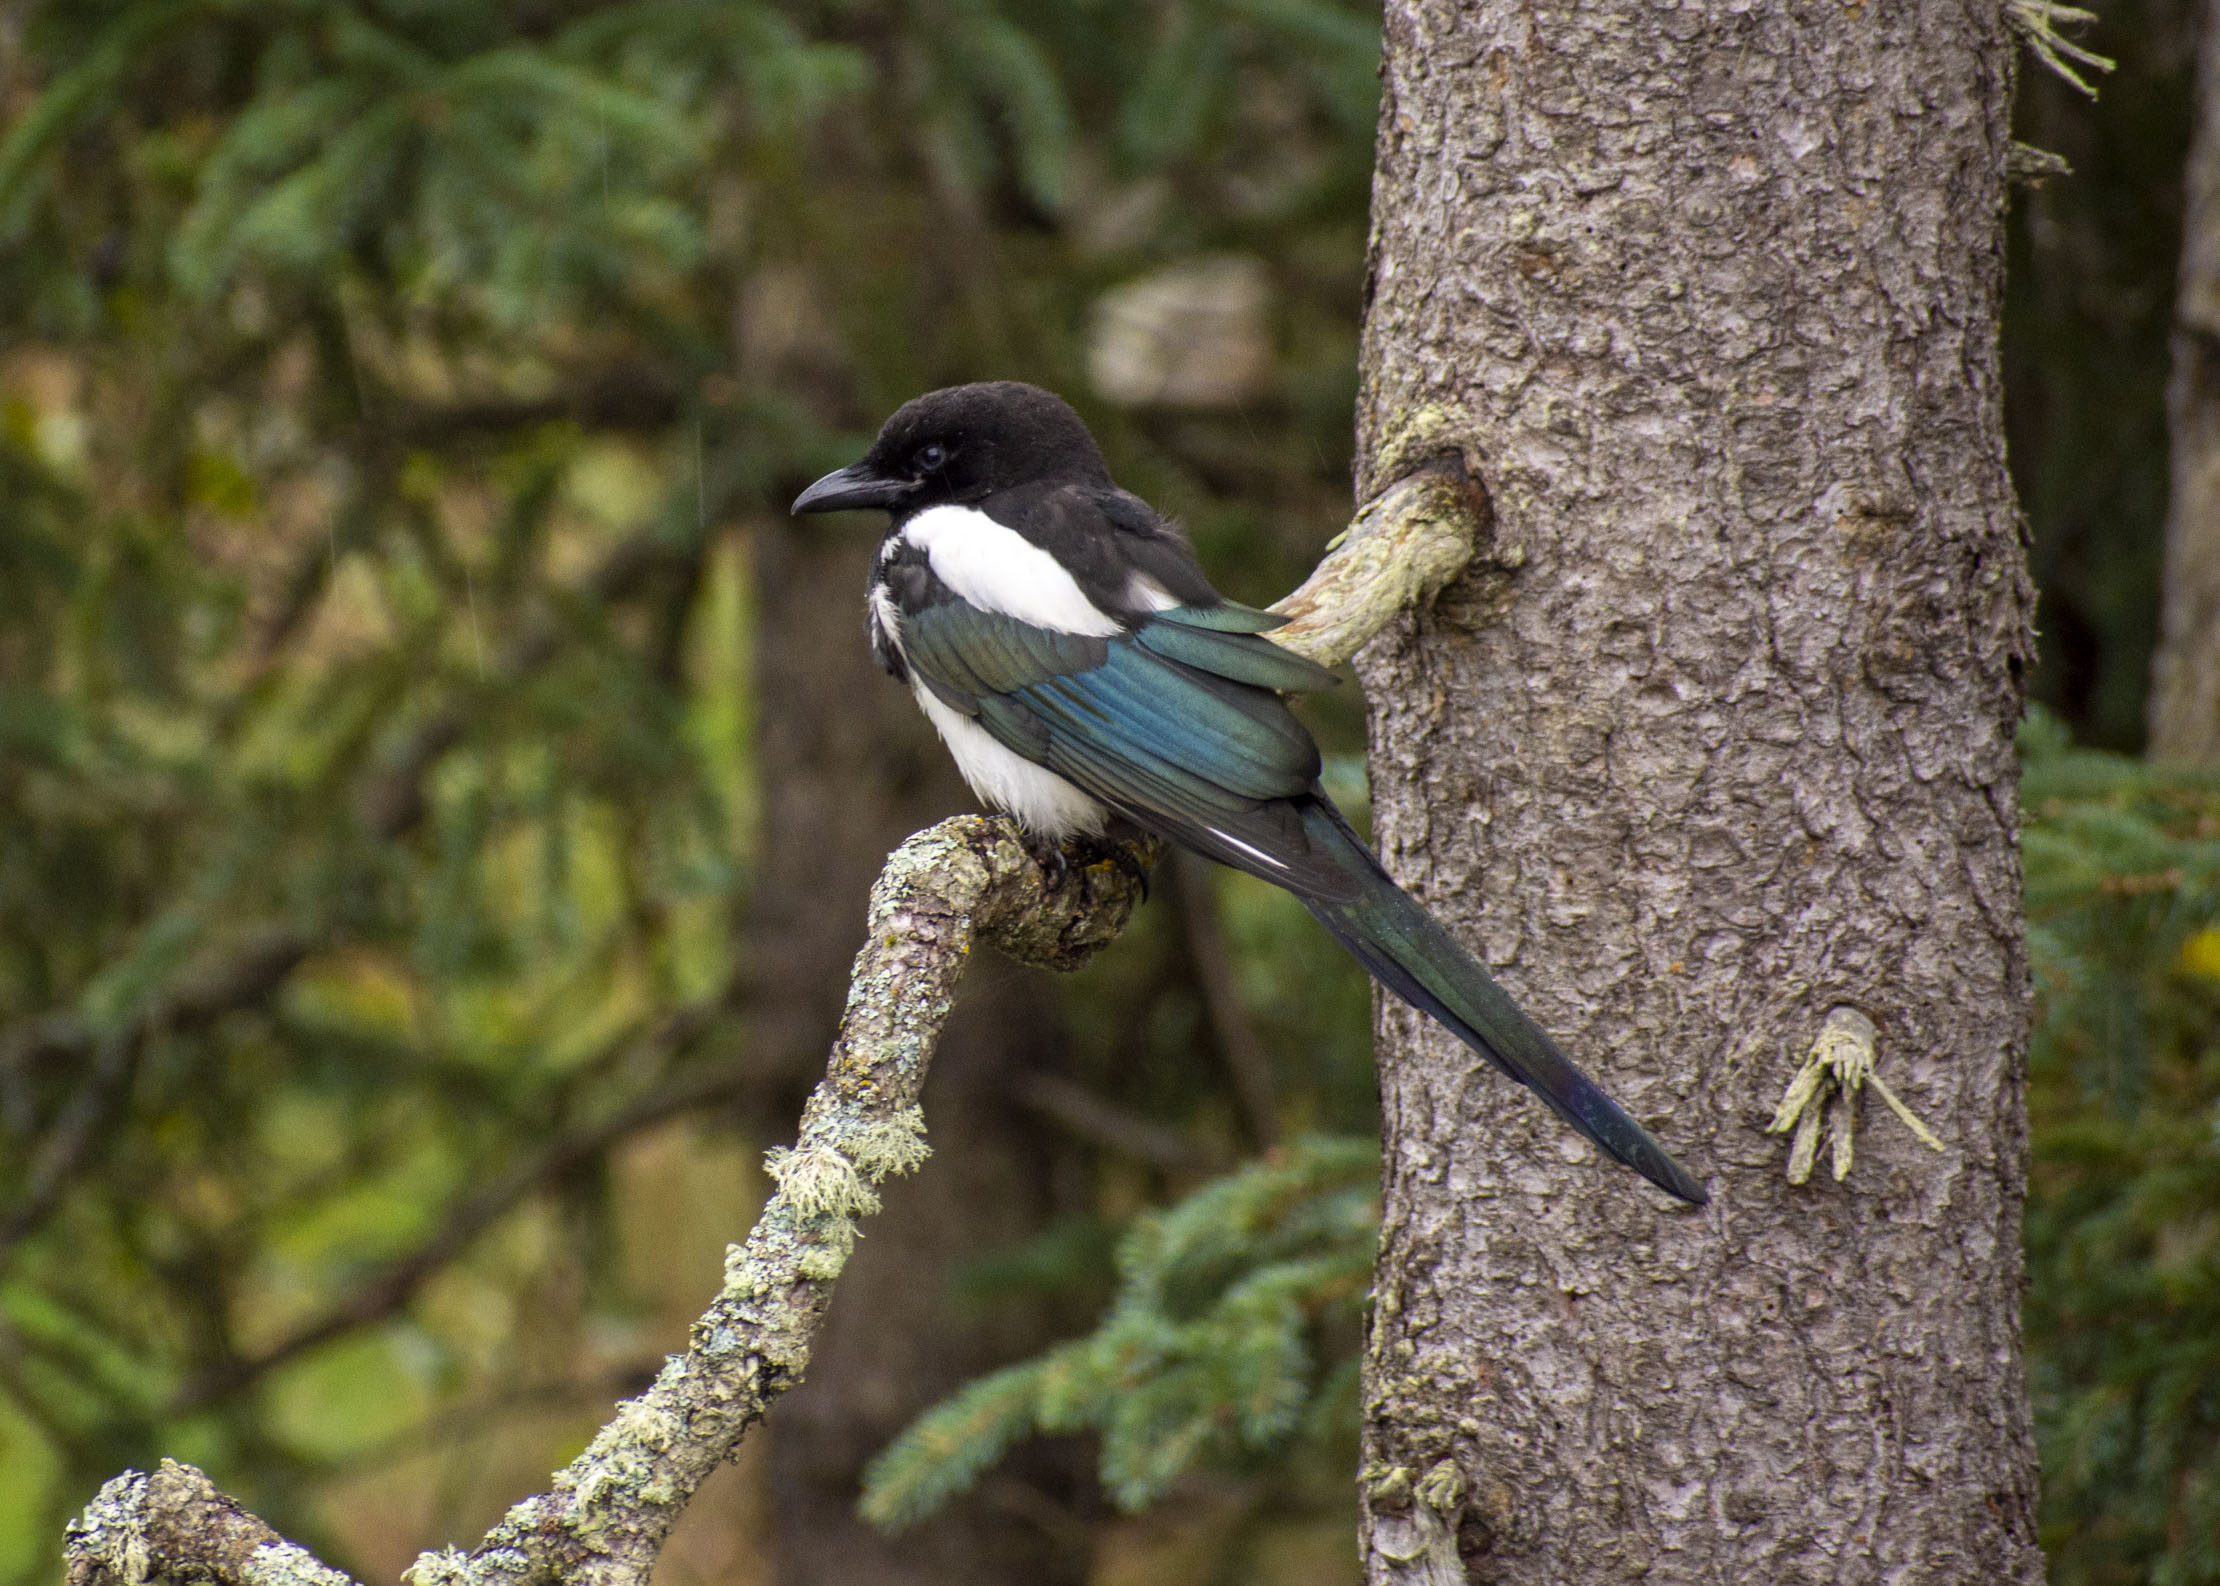 A magpie in a tree